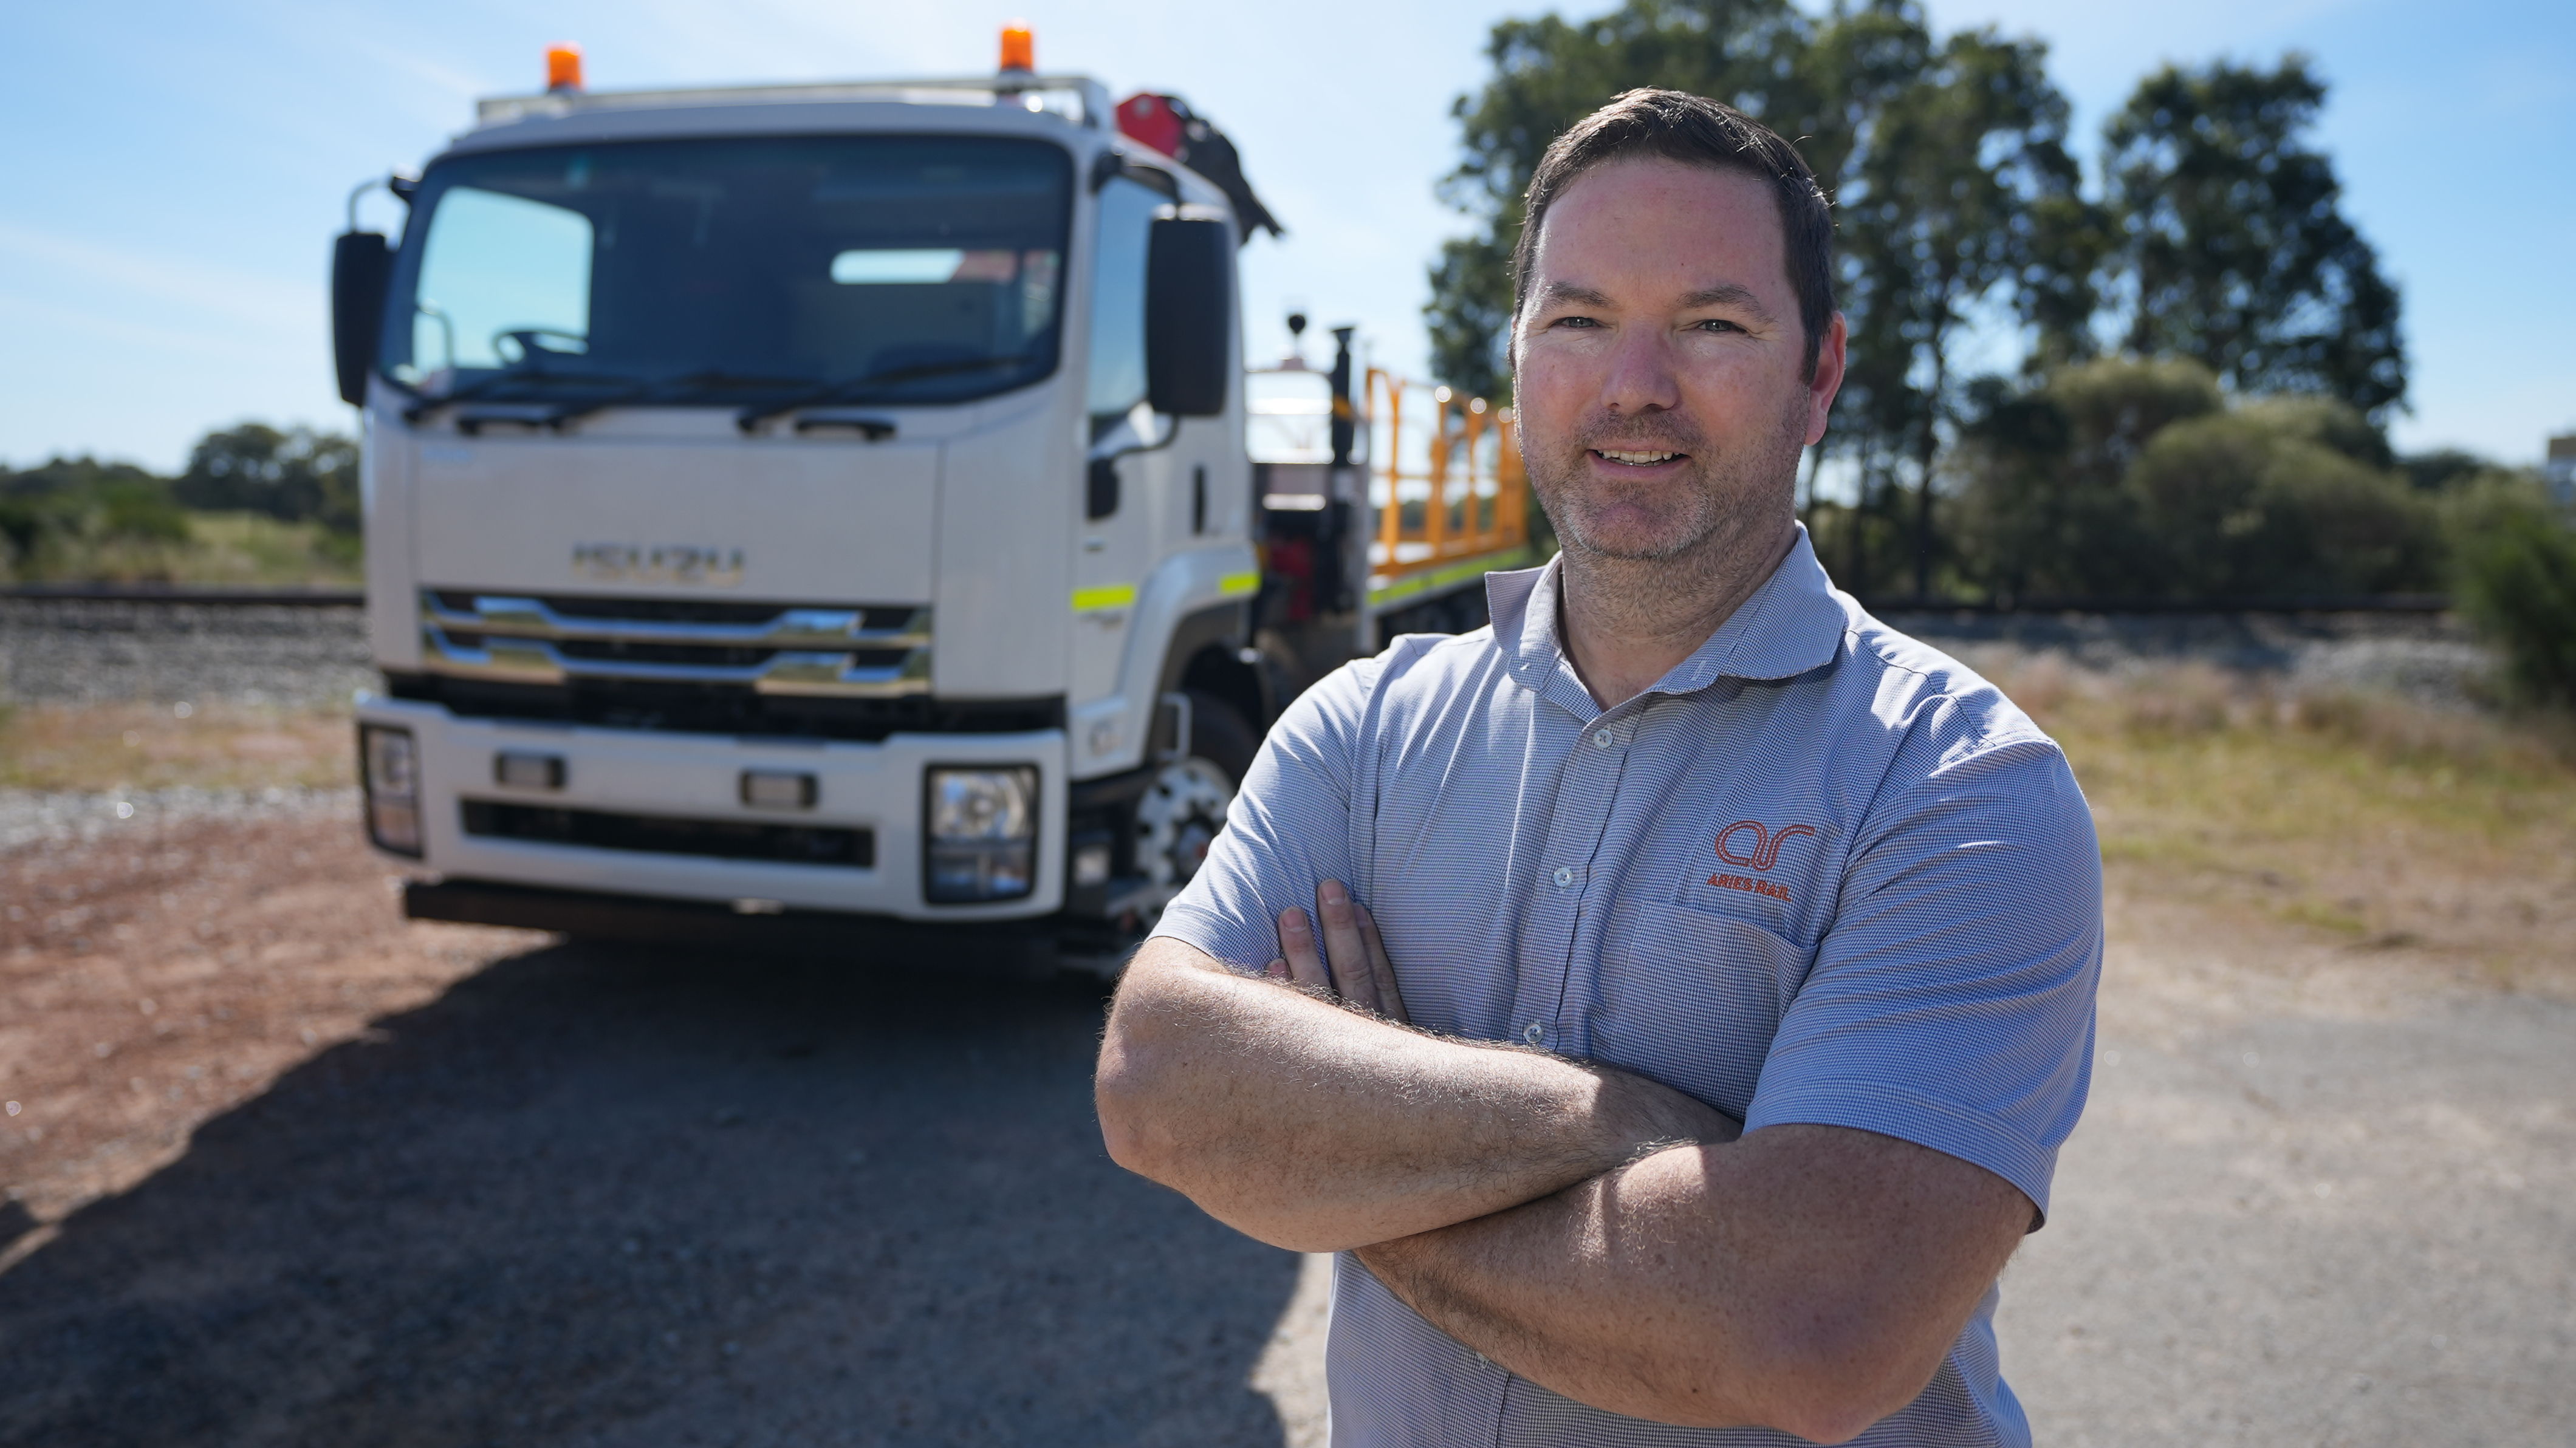 Aries Rail Electrical and Control Systems Manager Benjamin Stroud tests the capabilities of the Isuzu FVY 240-300.